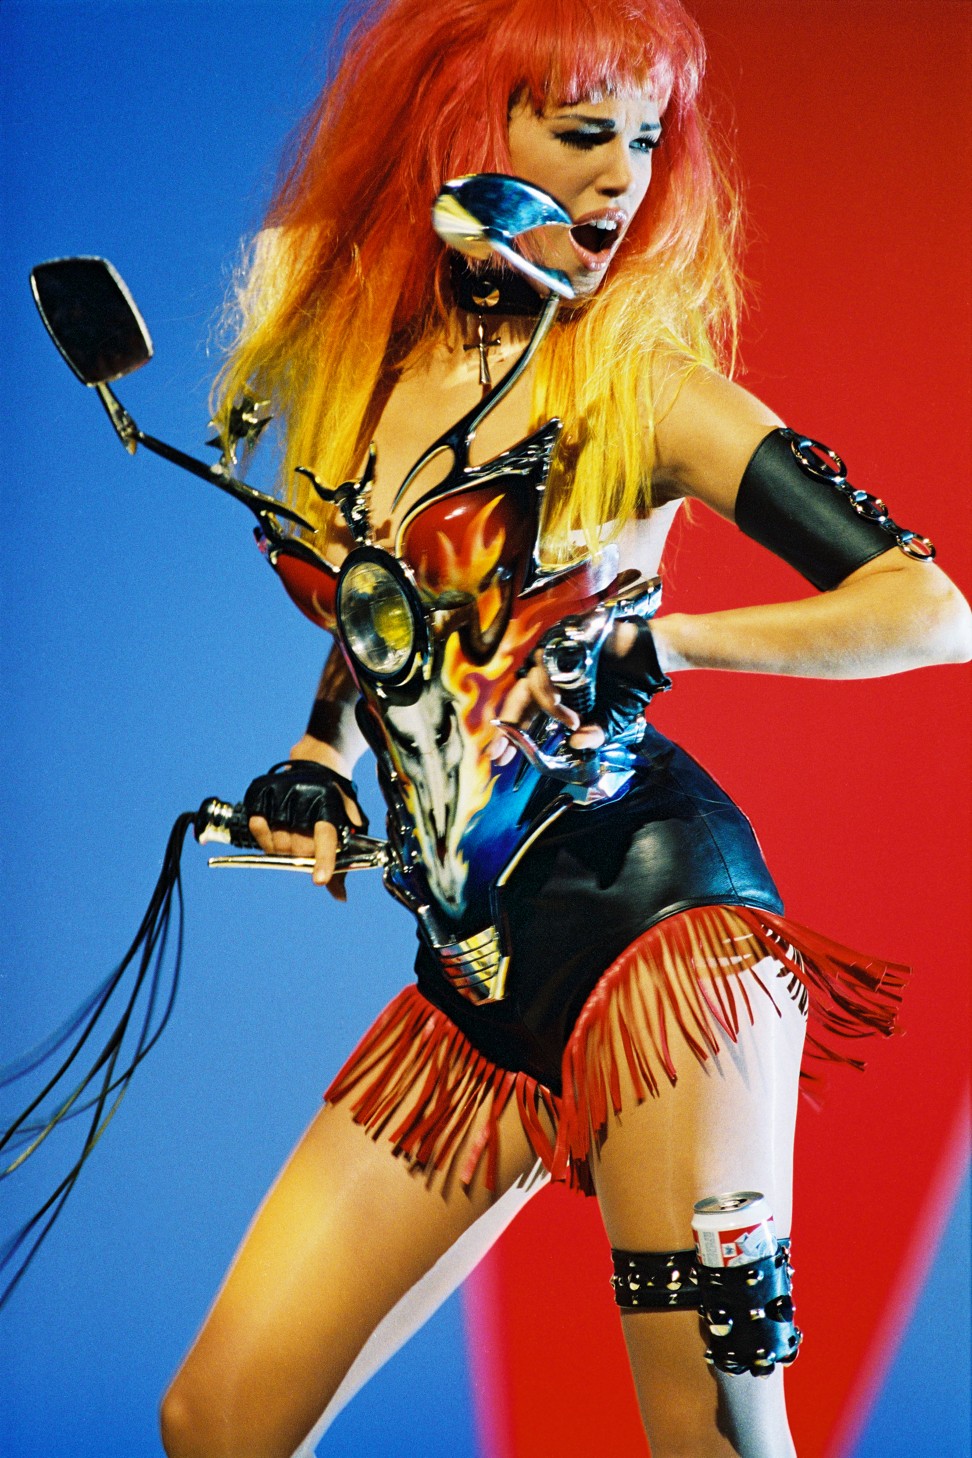 Fashion designer Thierry Mugler designed and created the costumes for George Michael’s Too Funky video, as worn by Swedish model Emma Sjöberg (now Emma Wiklund).